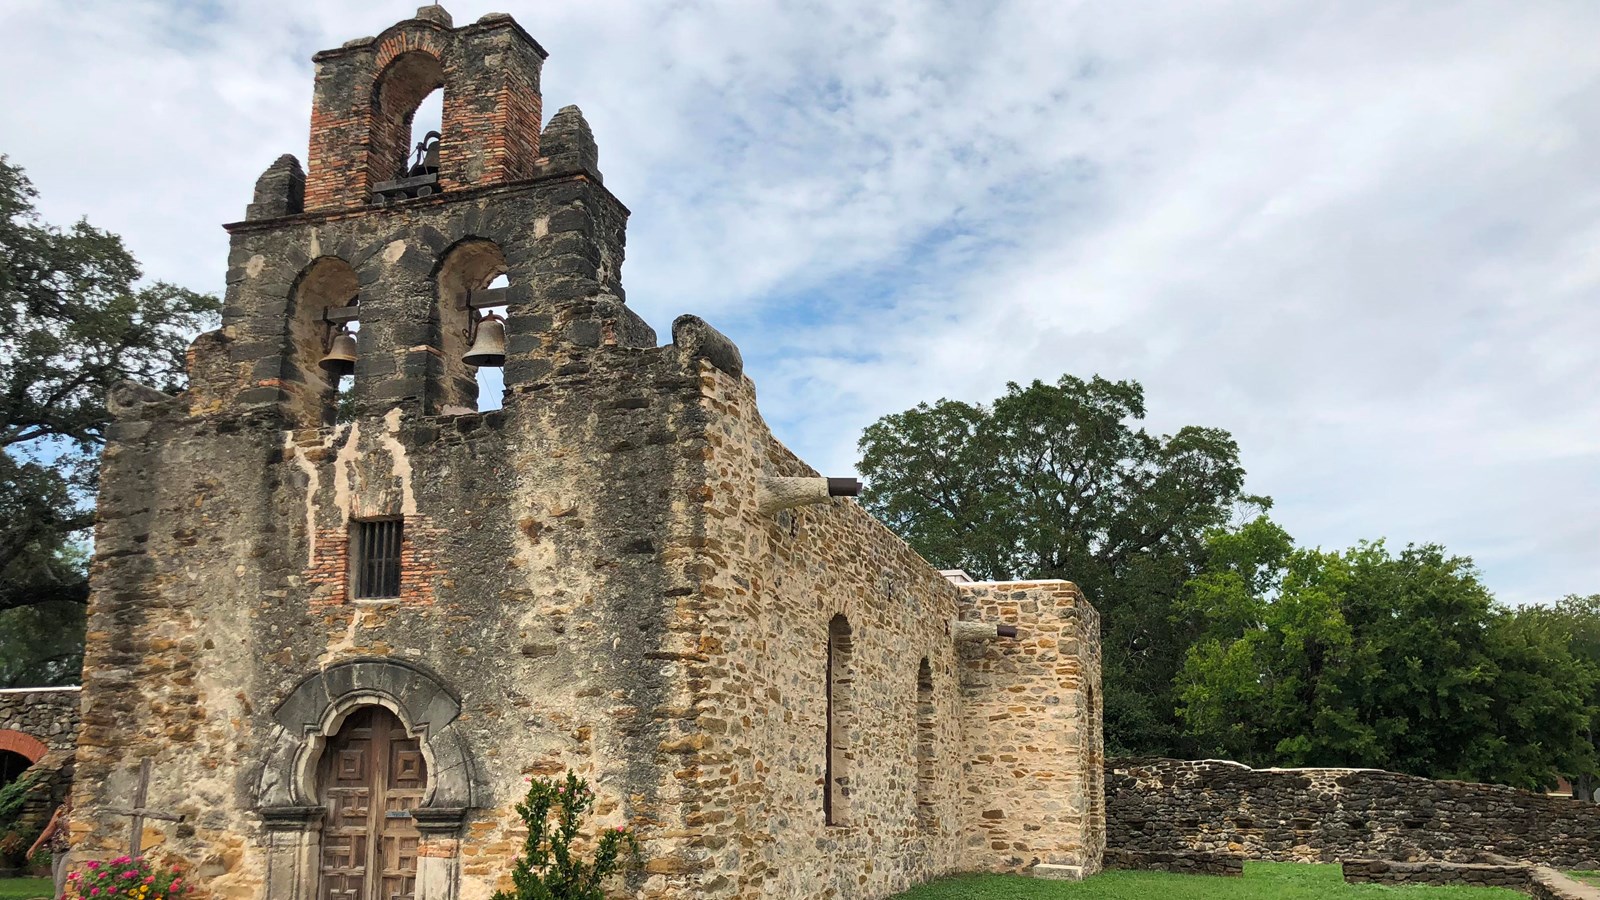 Mission Espada stone church with bell tower.